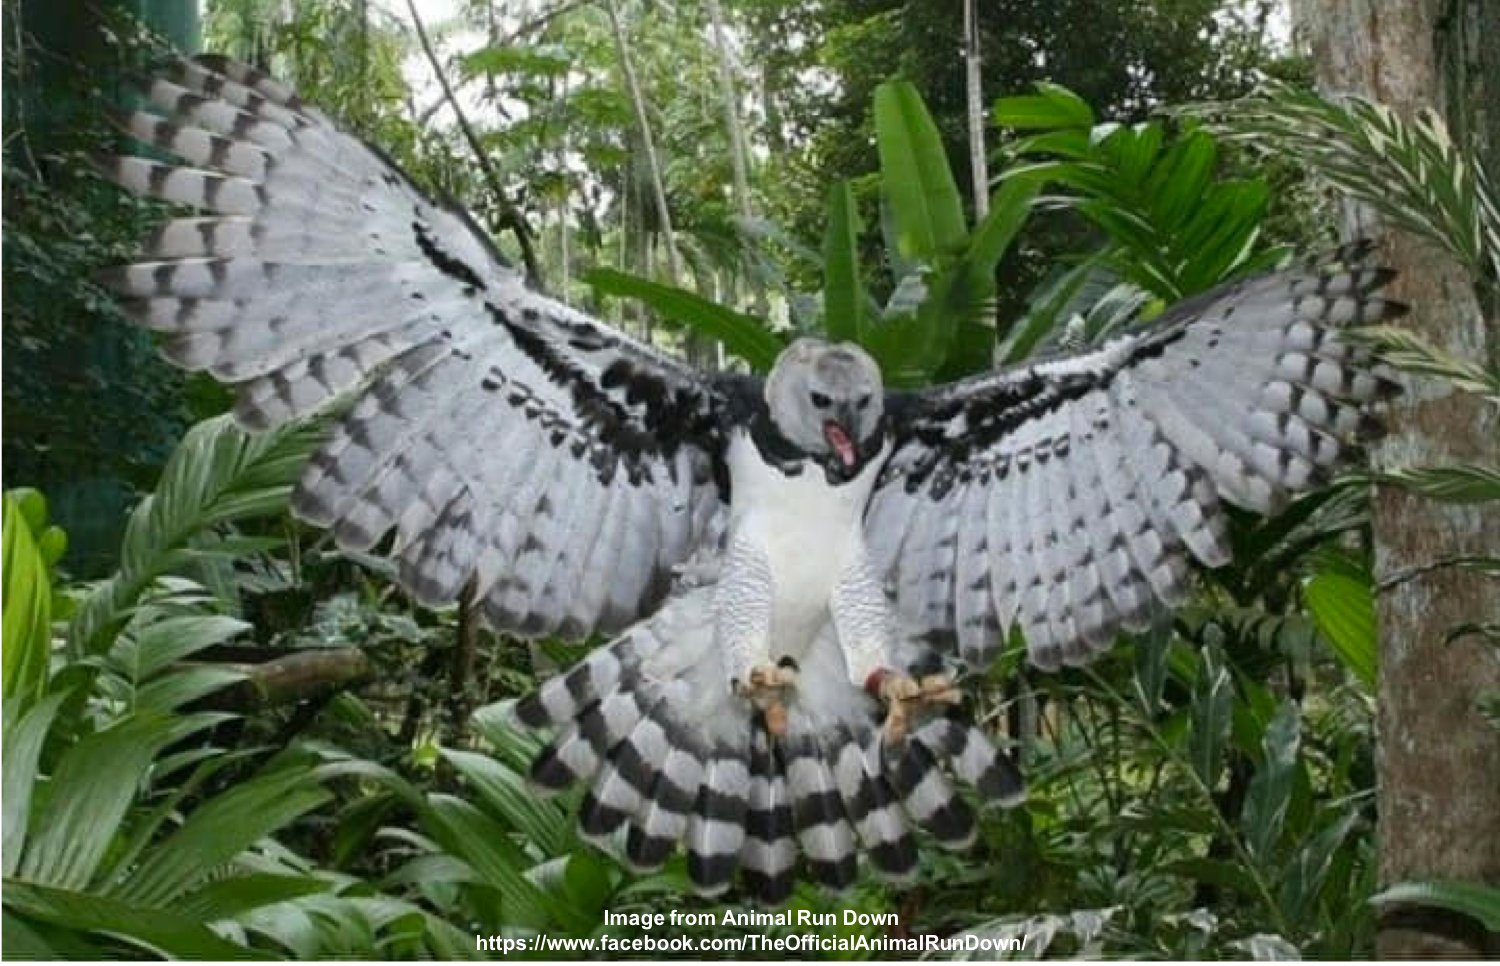 Mauna Dasari on X: Harpy Eagle PIVOTS IN THE AIR by using her